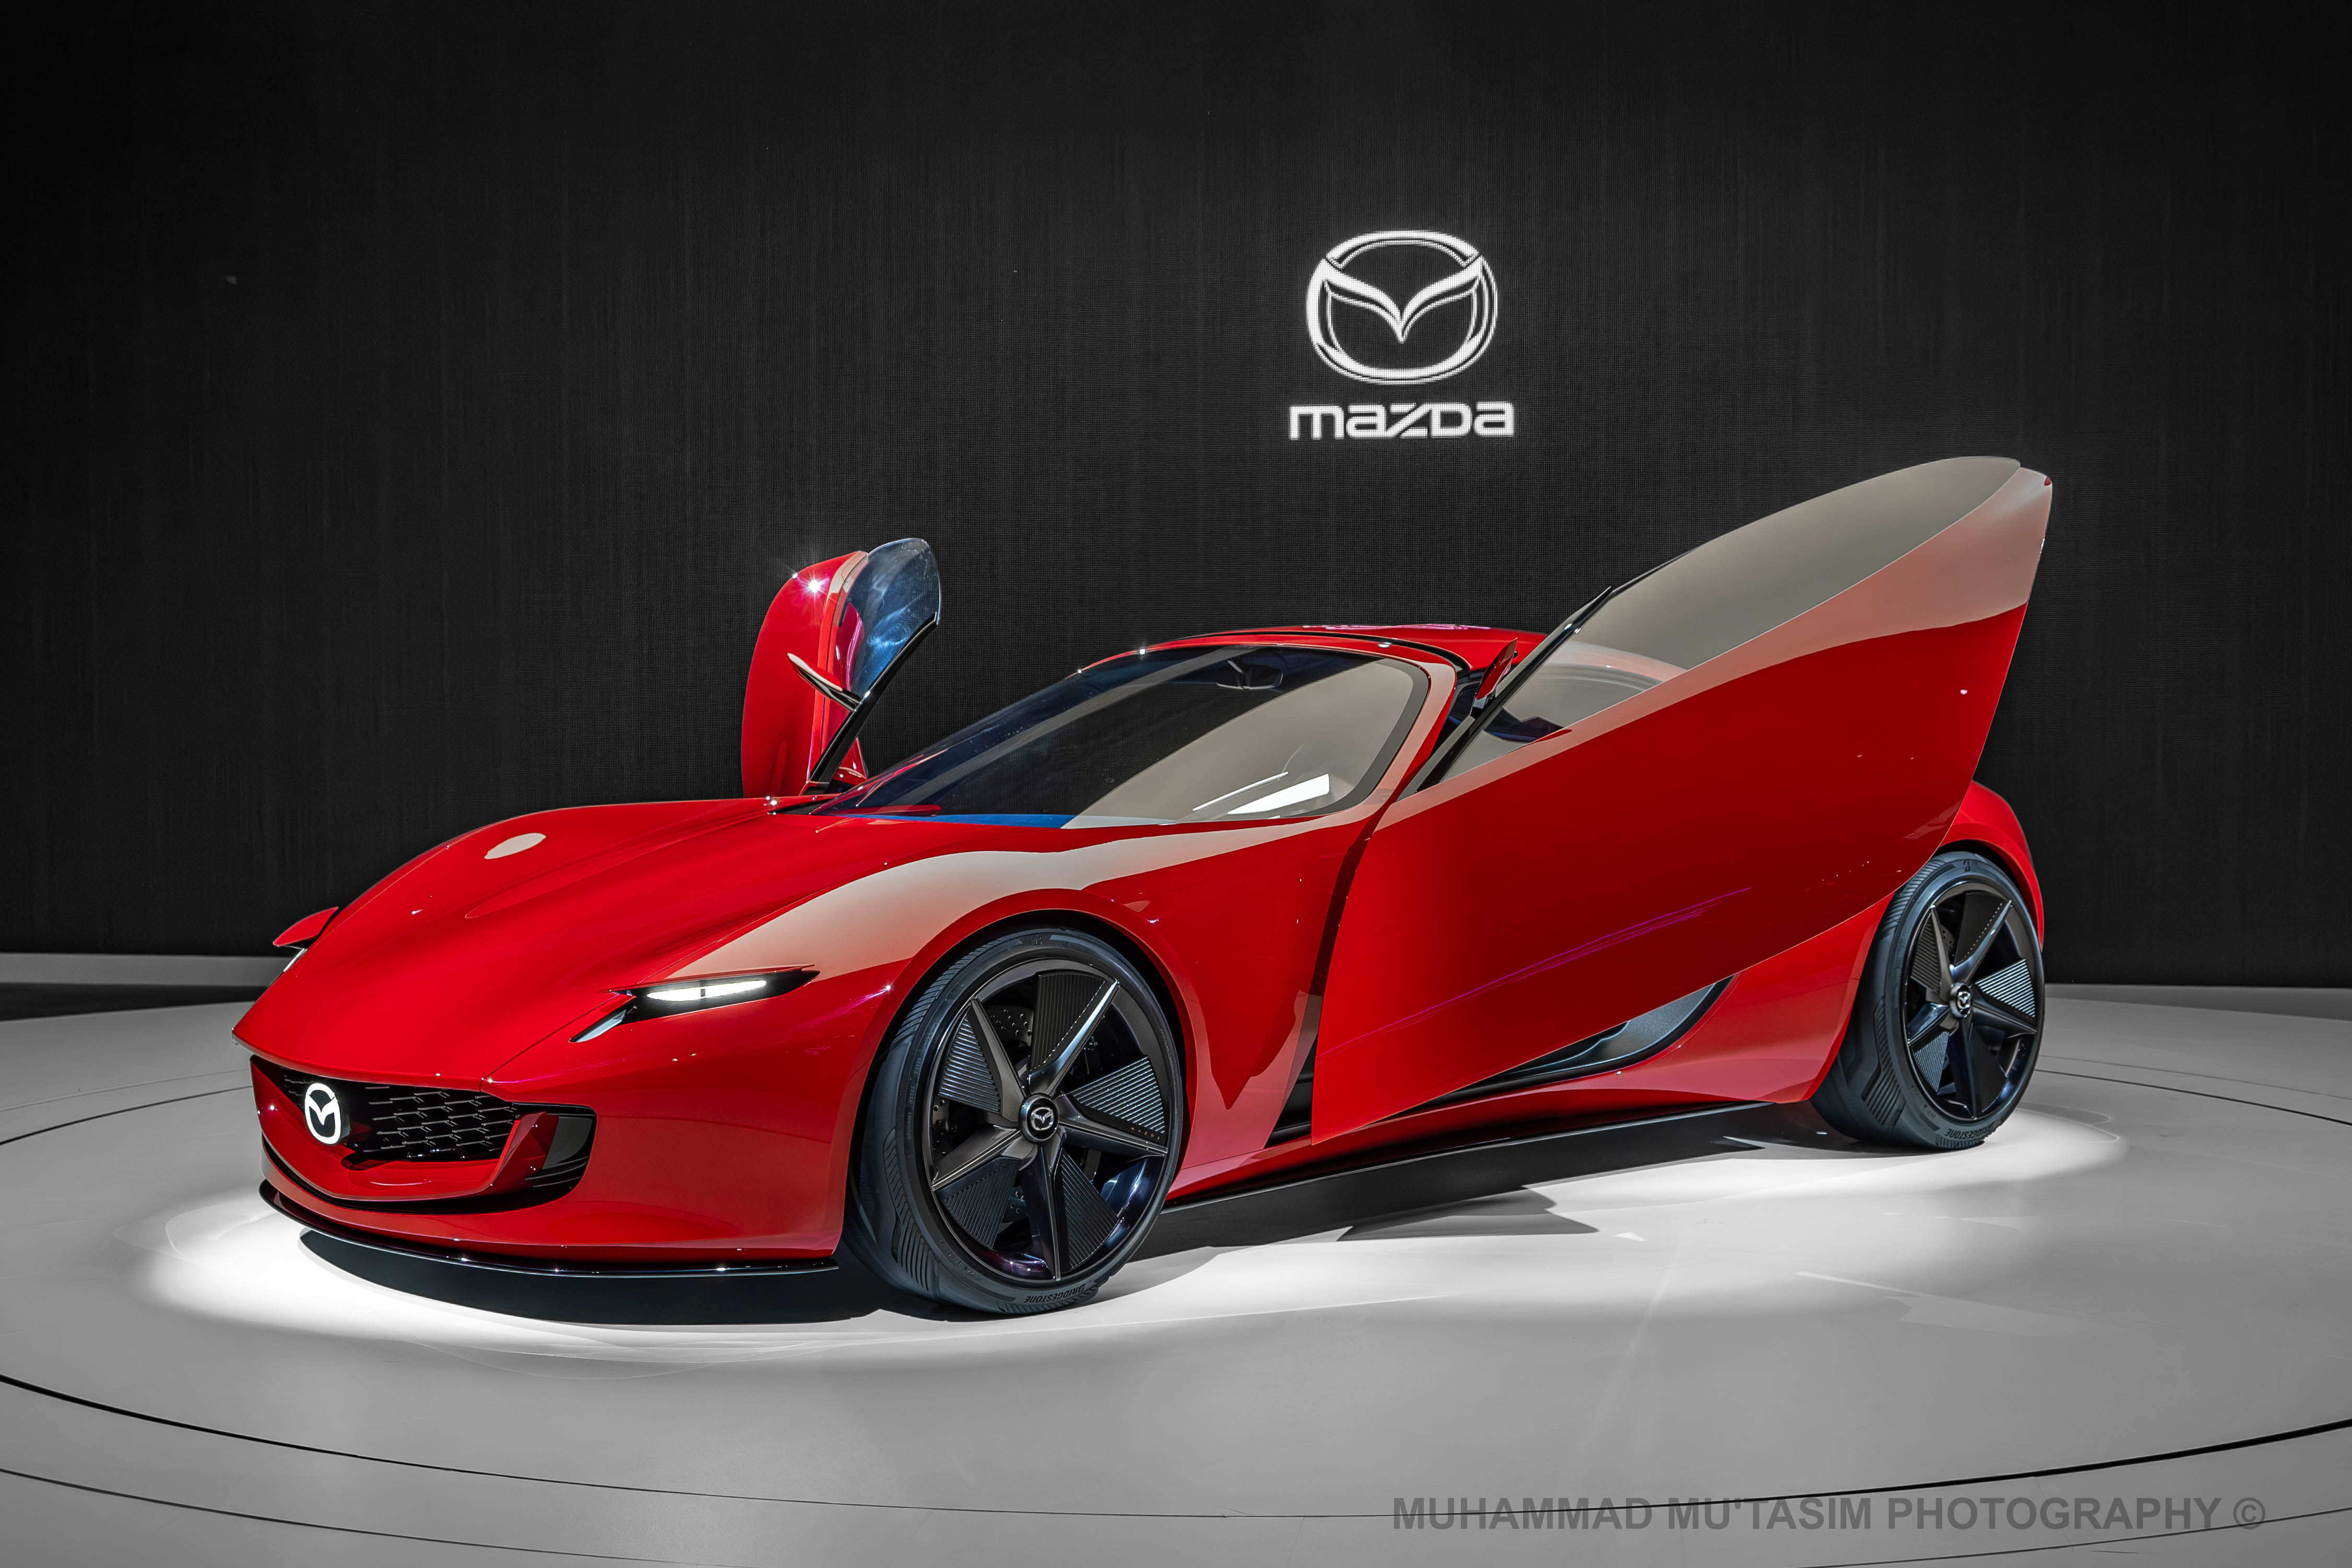 Japan Mobility Show 2023: Mazda’s Iconic SP Concept is an Exciting Reboot of the Sports Car Genre